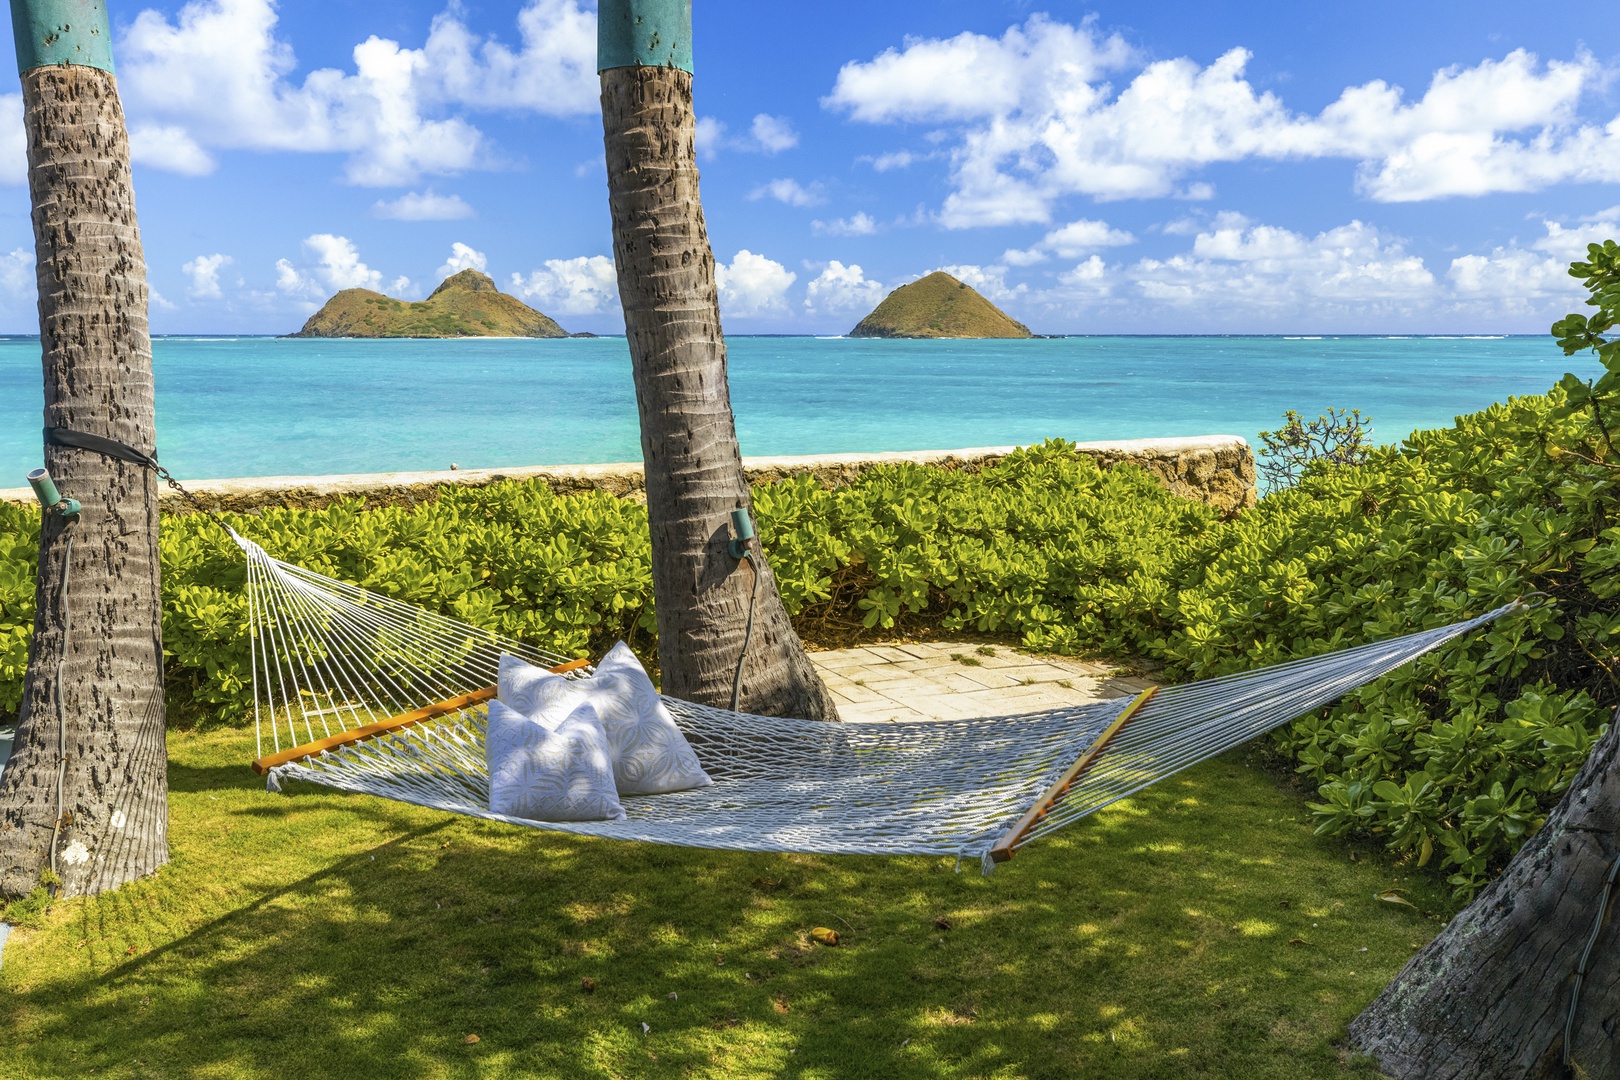 Kailua Vacation Rentals, Mokulua Sunrise - Lay back on the hammock, feel the salty ocean breeze, and immerse yourself into tranquil, lavish island living